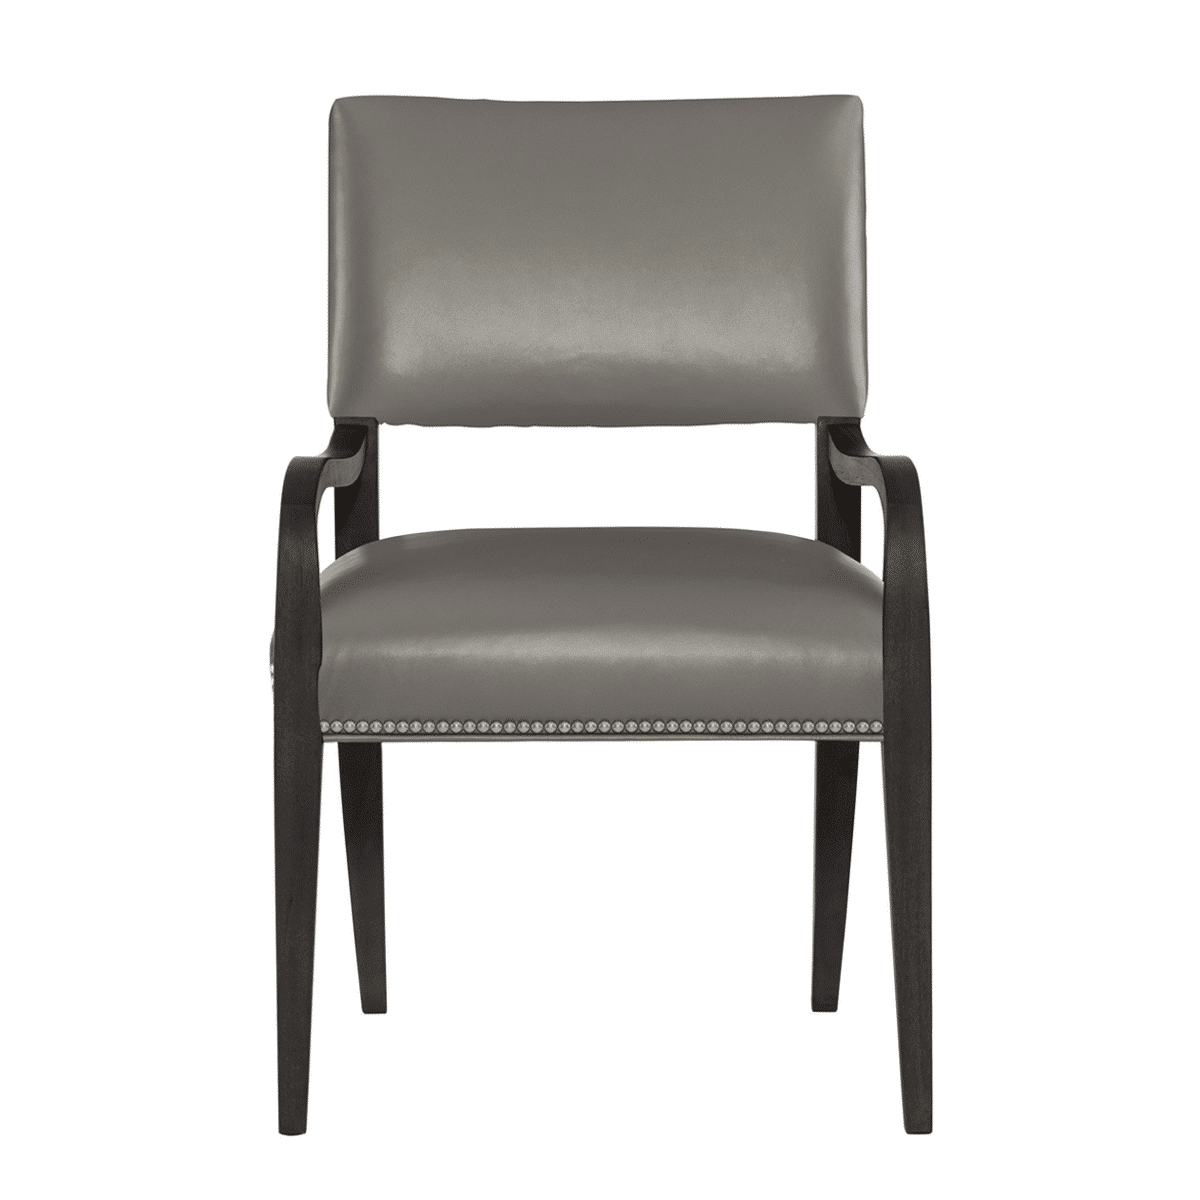 Moore Arm Chair In Leather Upholstery, Black Leather Arm Dining Chair